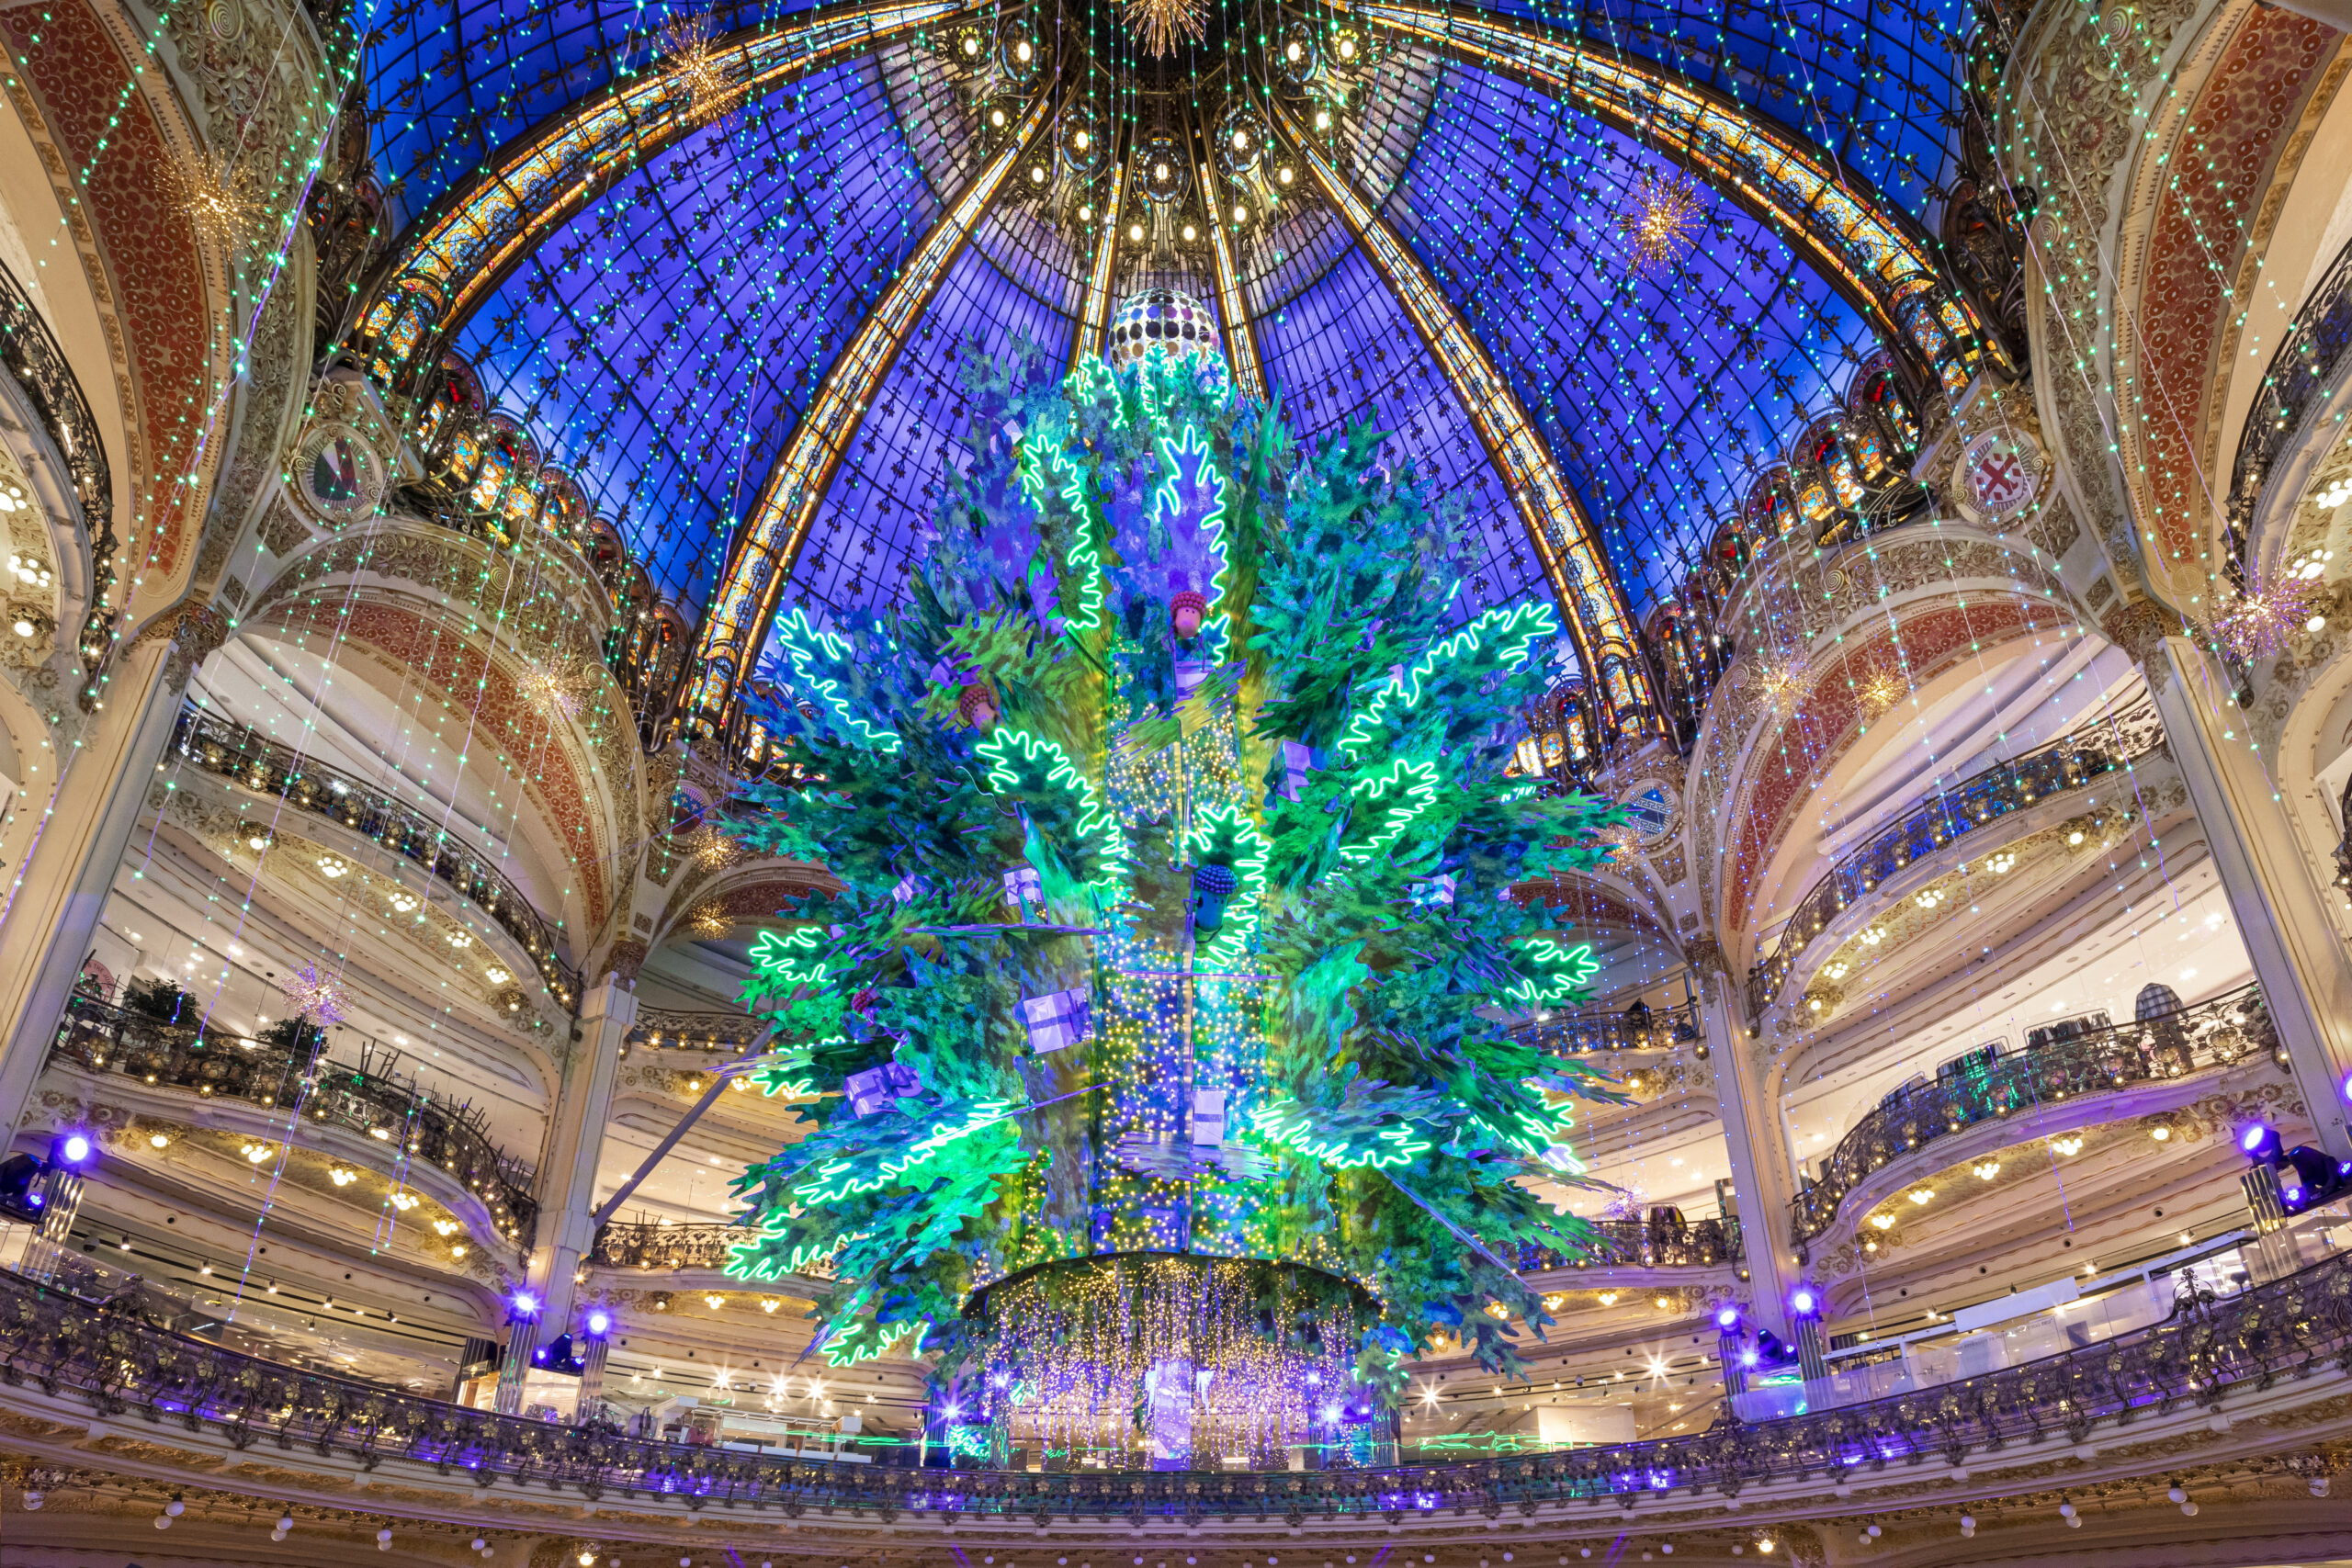 Exclusive Parisian Personal Shopping Now At Galeries Lafayette